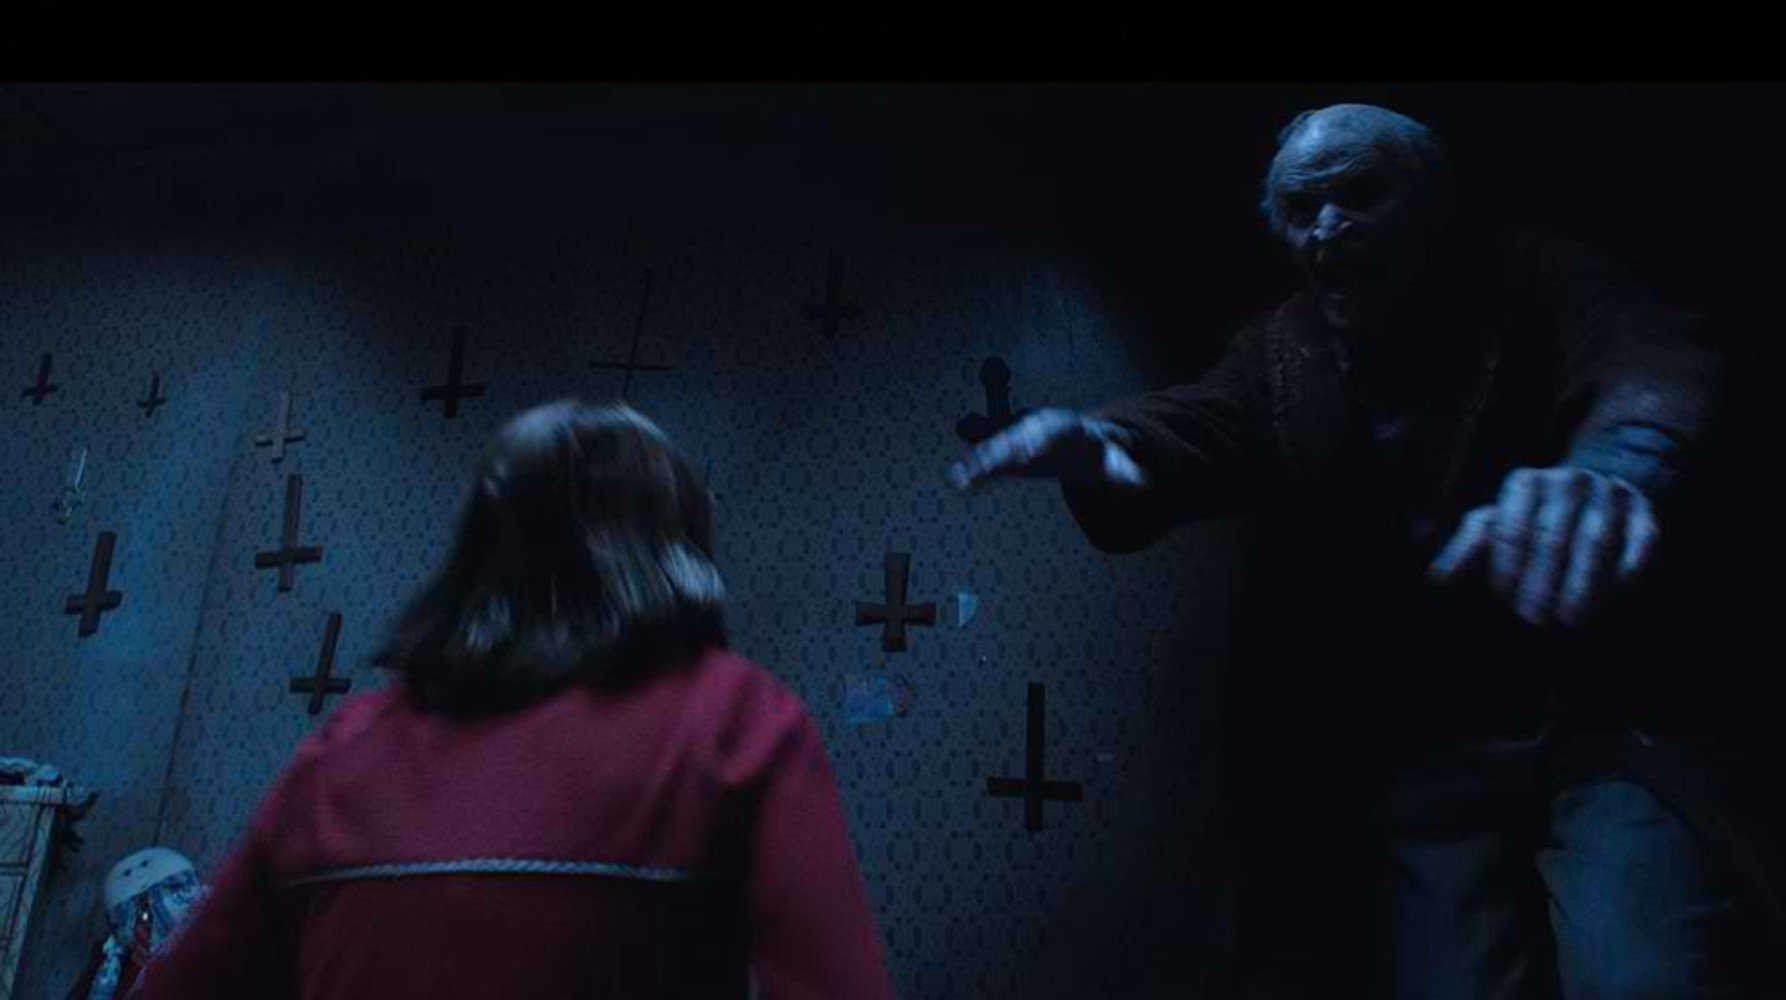 Still taken from The Conjuring 2.